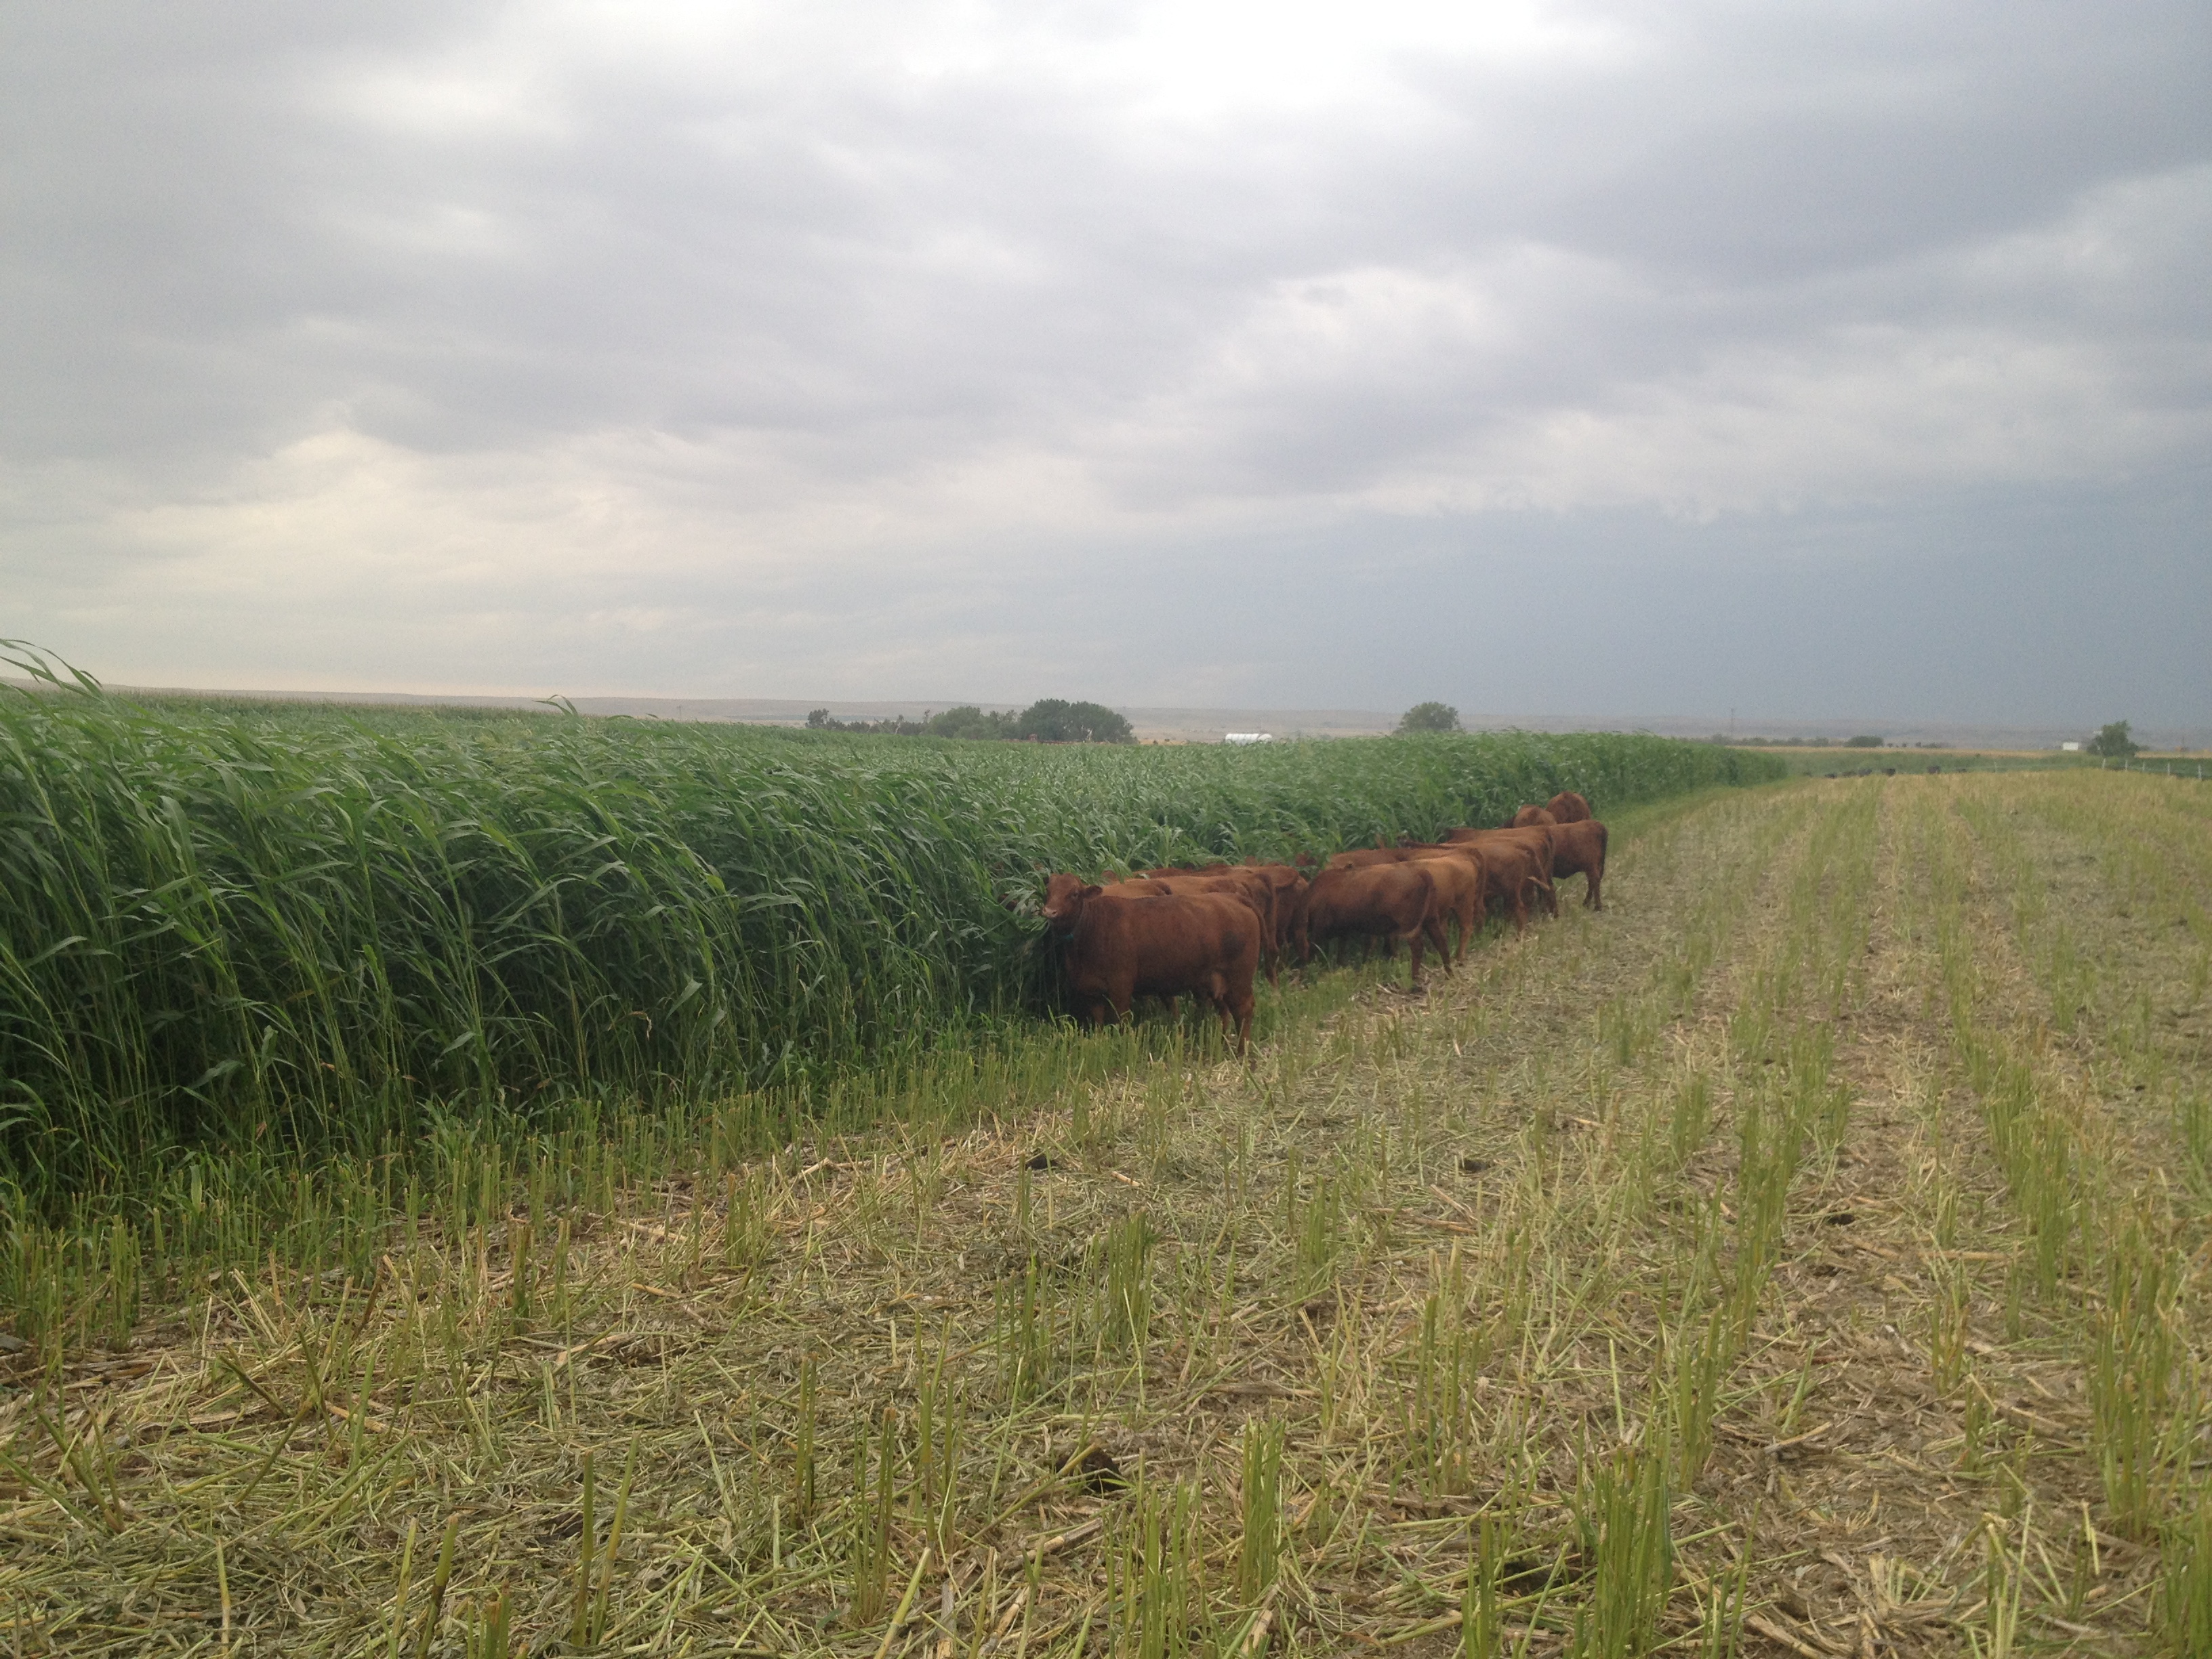 A grass forage blend grows in a central SD field as Red cattle graze.